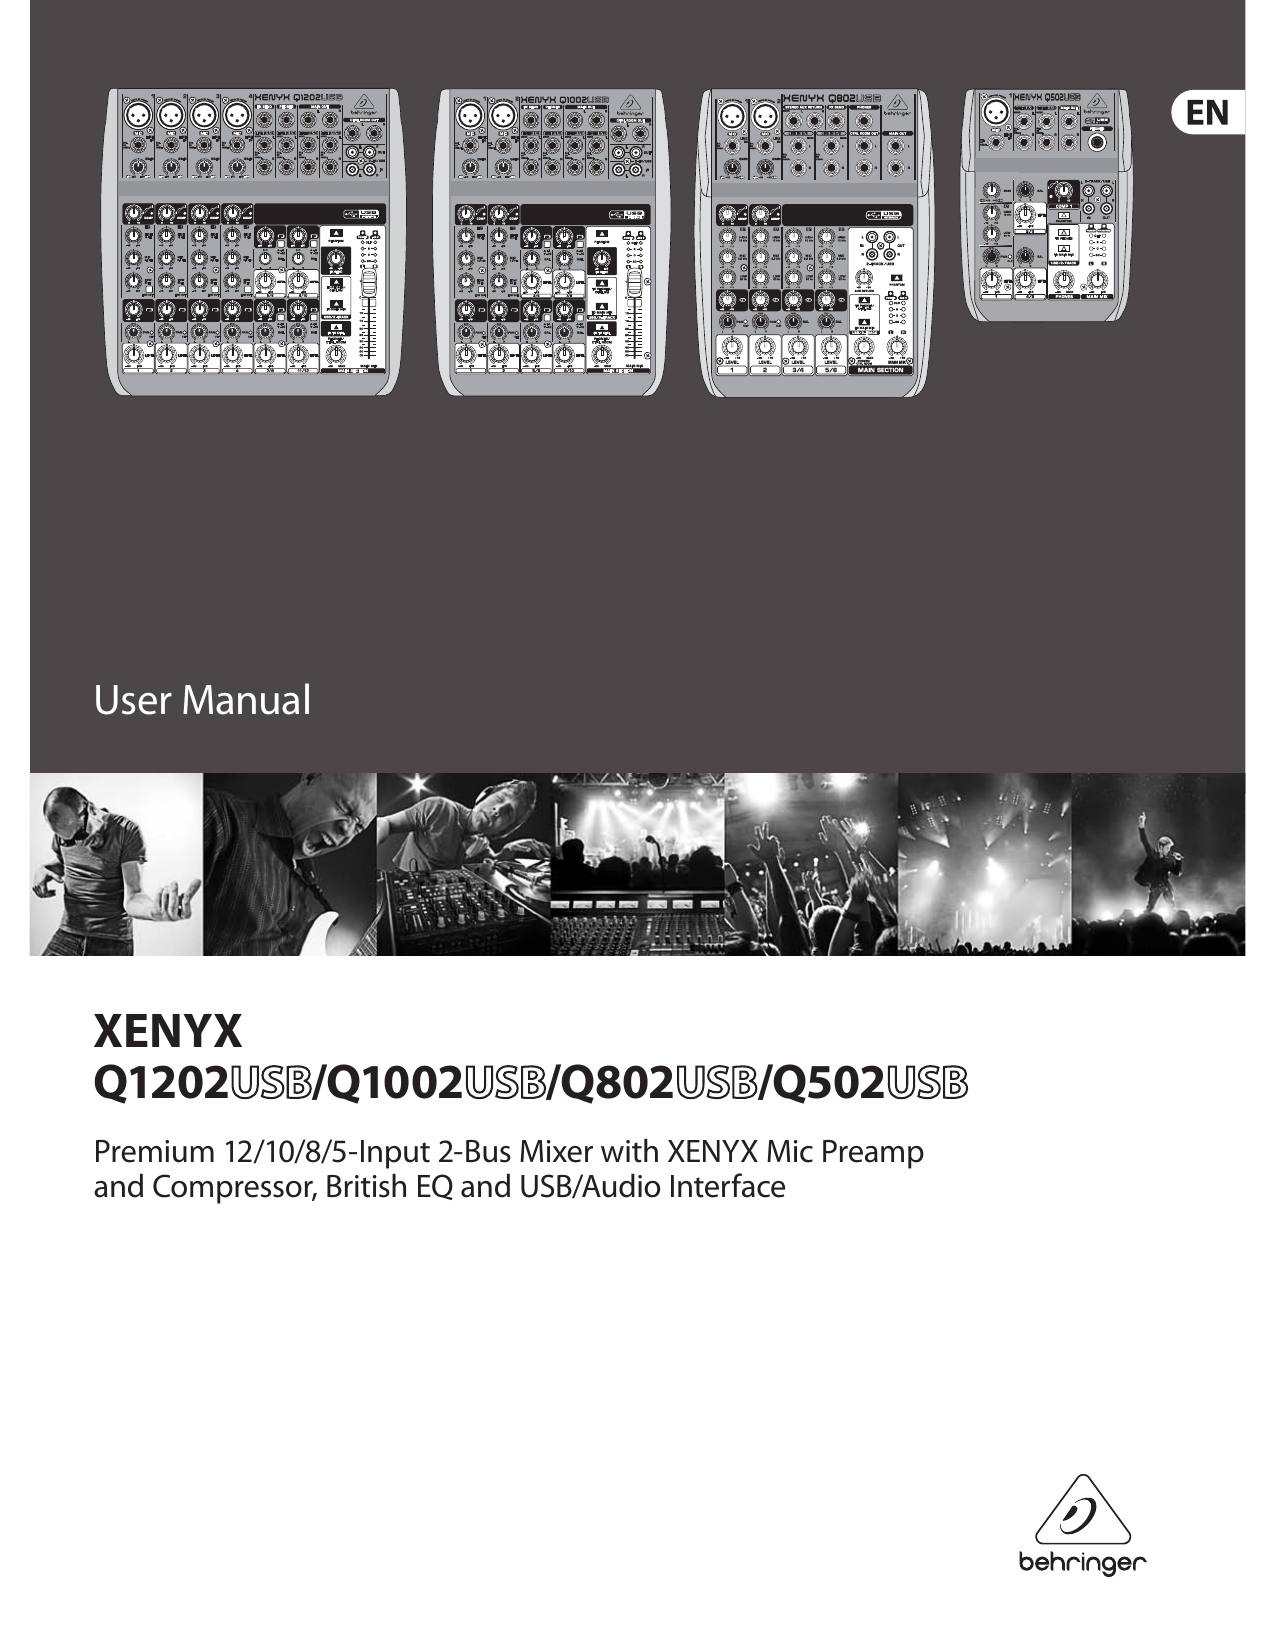 behringer xenyx q802usb power supply issues